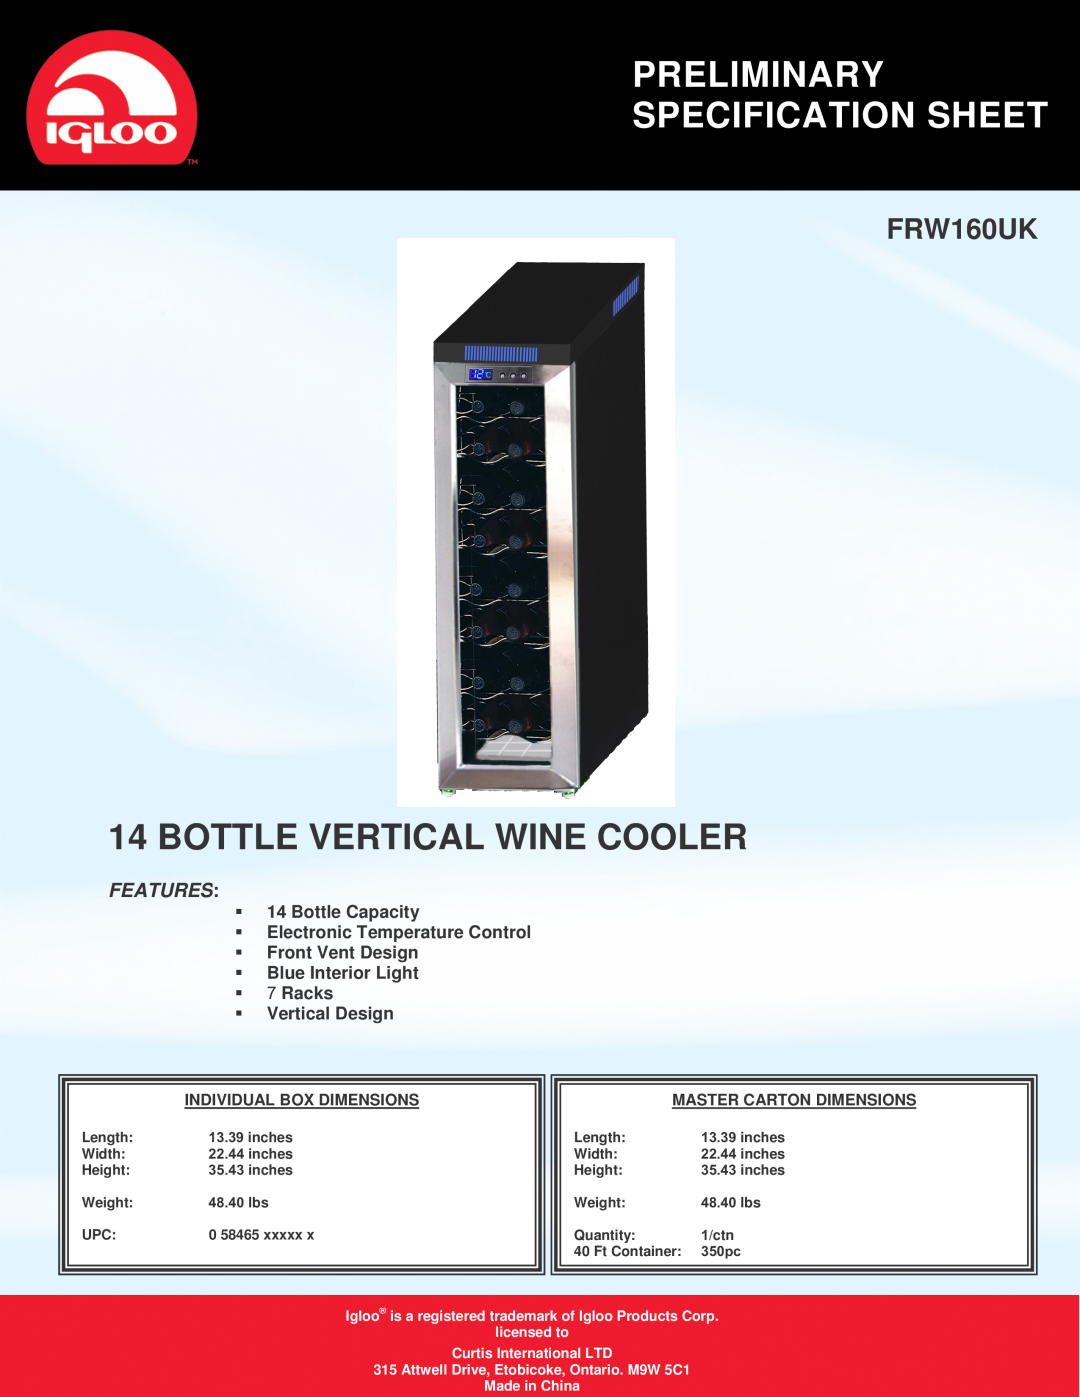 Igloo FRW160UK specifications Preliminary Specification Sheet, Bottle Vertical Wine Cooler, Features, Vertical Design 